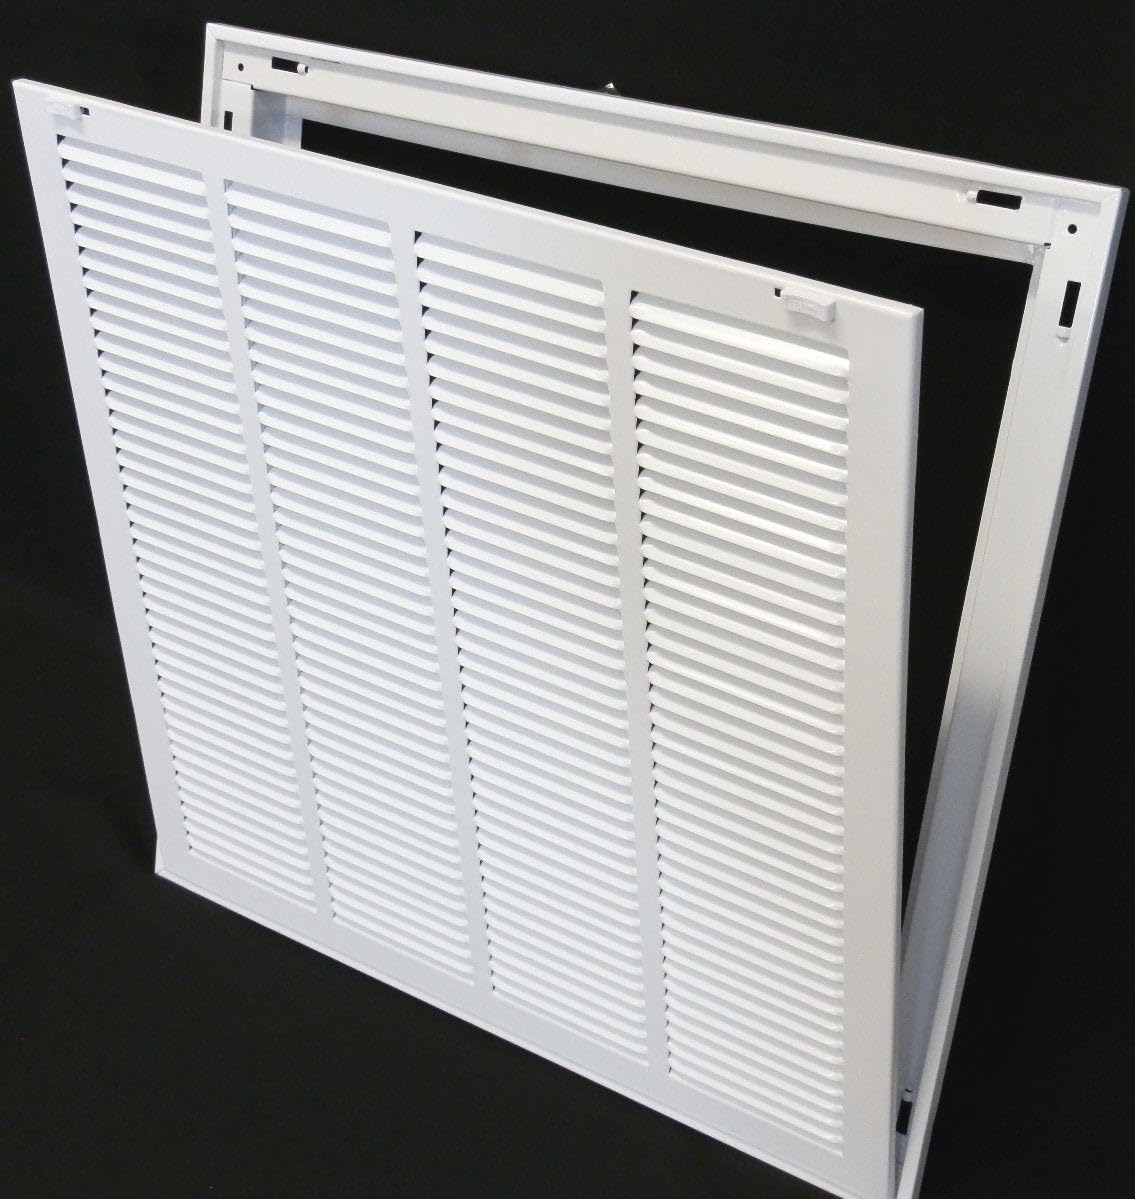 36&quot; X 20&quot; Steel Return Air Filter Grille for 1&quot; Filter - Removable Frame - [Outer Dimensions: 38 5/8&quot; X 22 5/8&quot;]